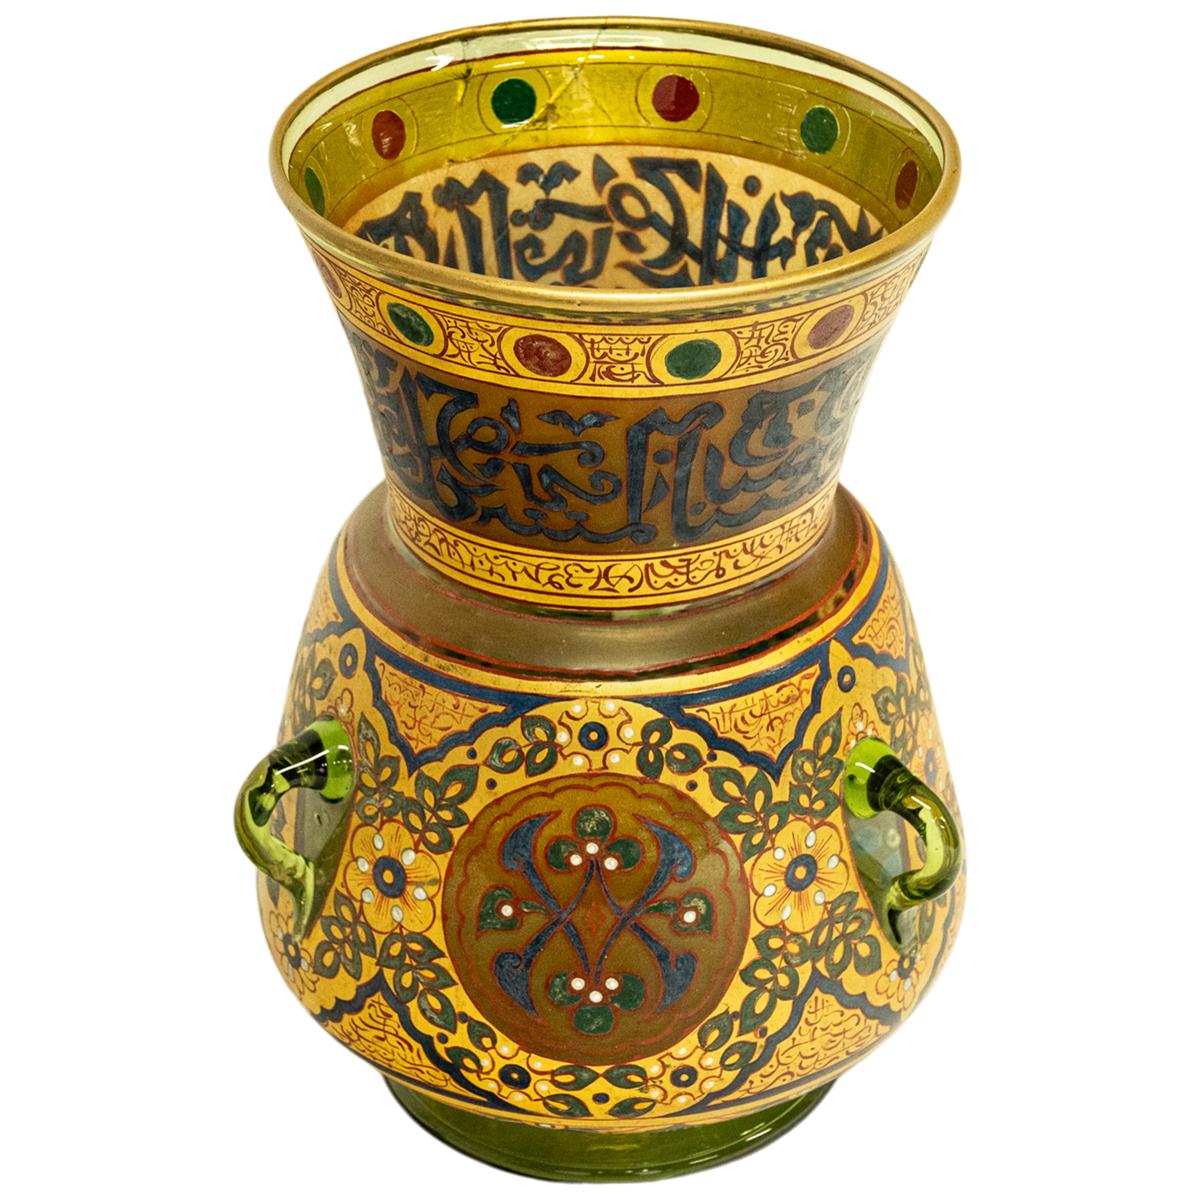 Antique French Islamic Glass Enamel Gilt Mamluk Revival Mosque Lamp Brocard 1880 For Sale 7